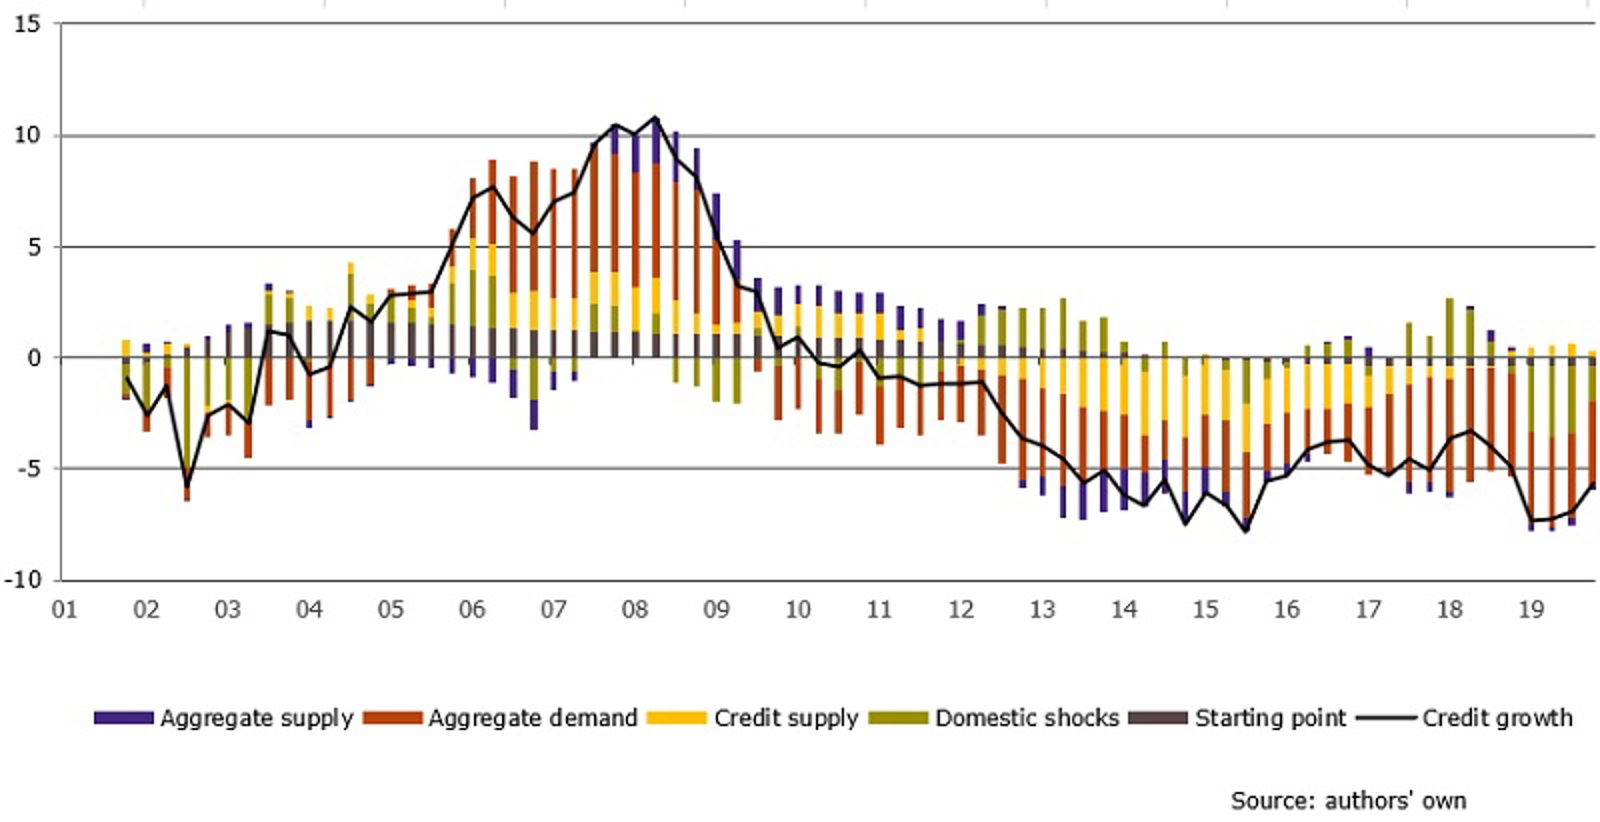 Historical decomposition of annual (real) credit growth to NFCs (NL)